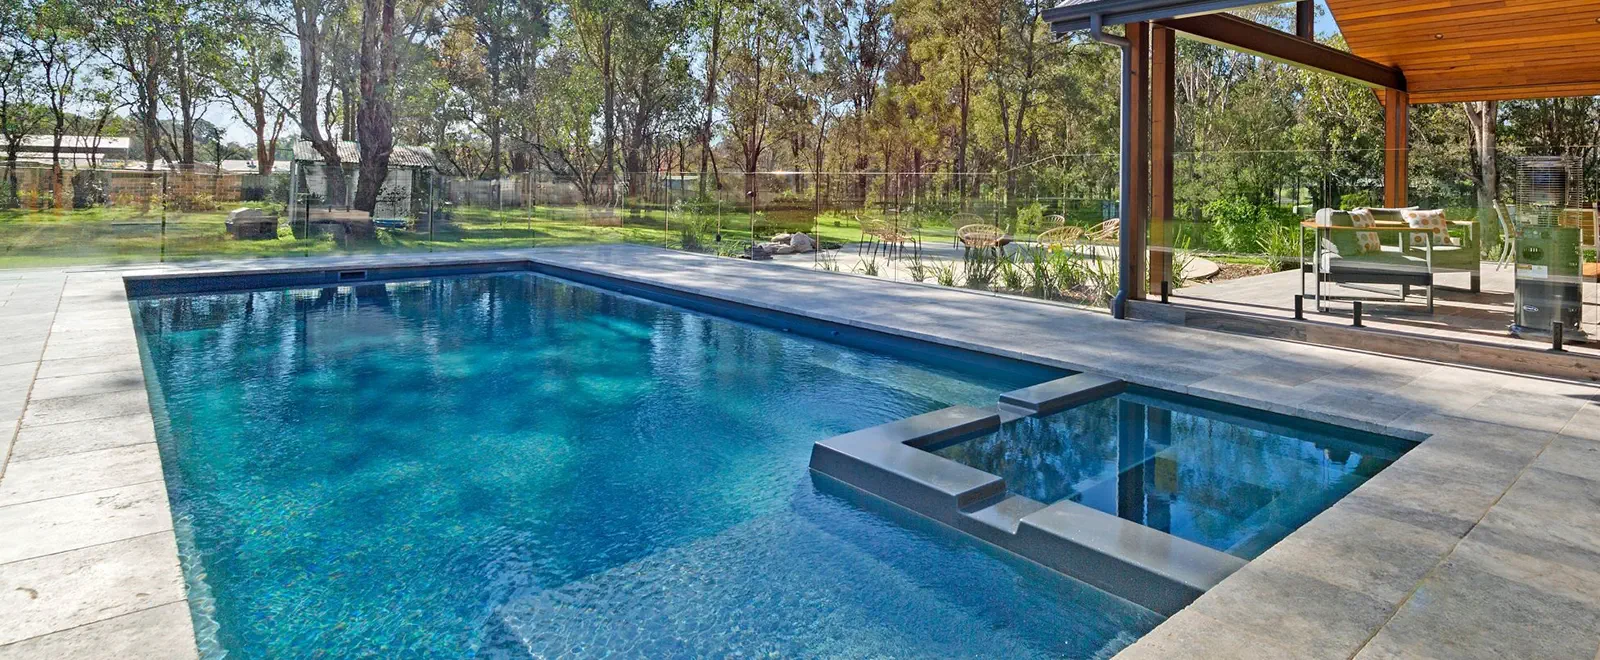 pool installers in sydney, hornsby, liverpool, macarthur, penrith, sutherland, wollongong